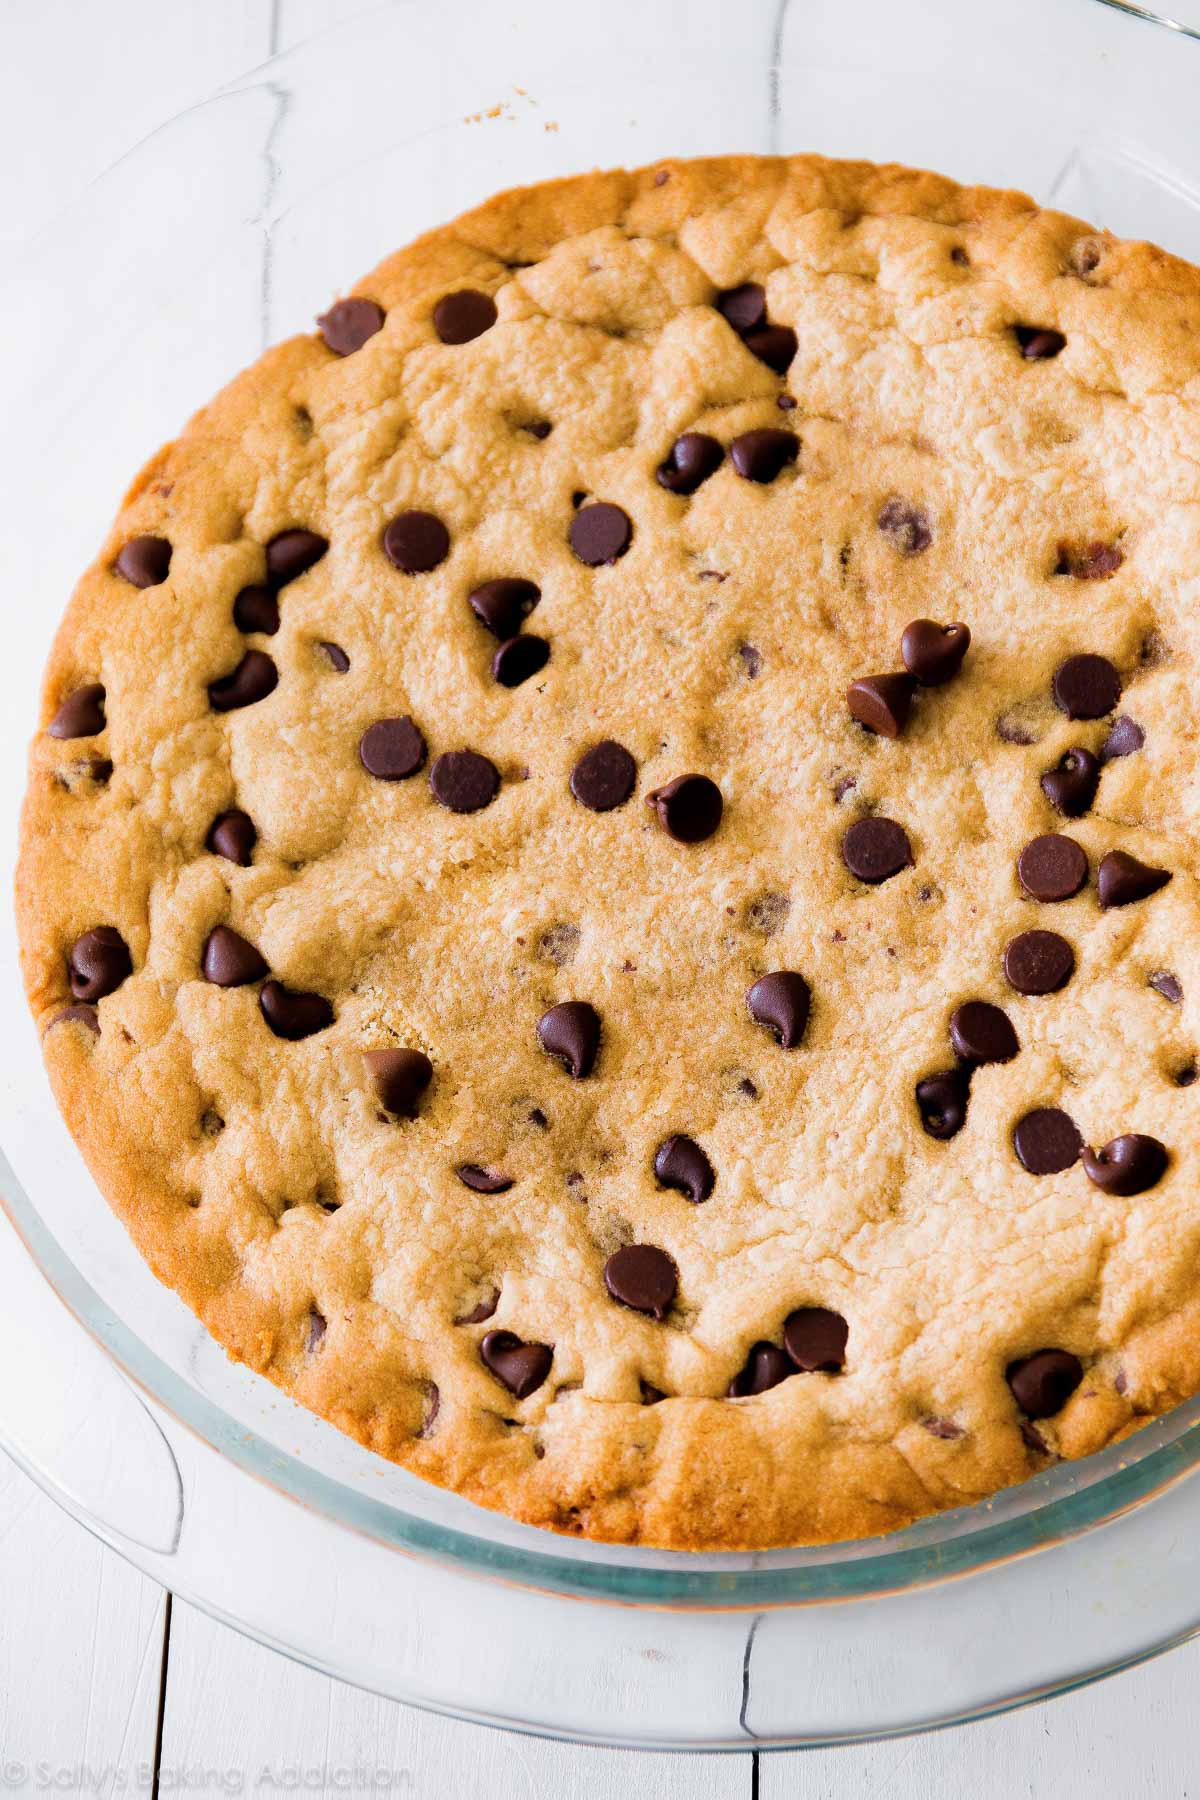 Try this recipe for shippable, giftable chocolate chip cake